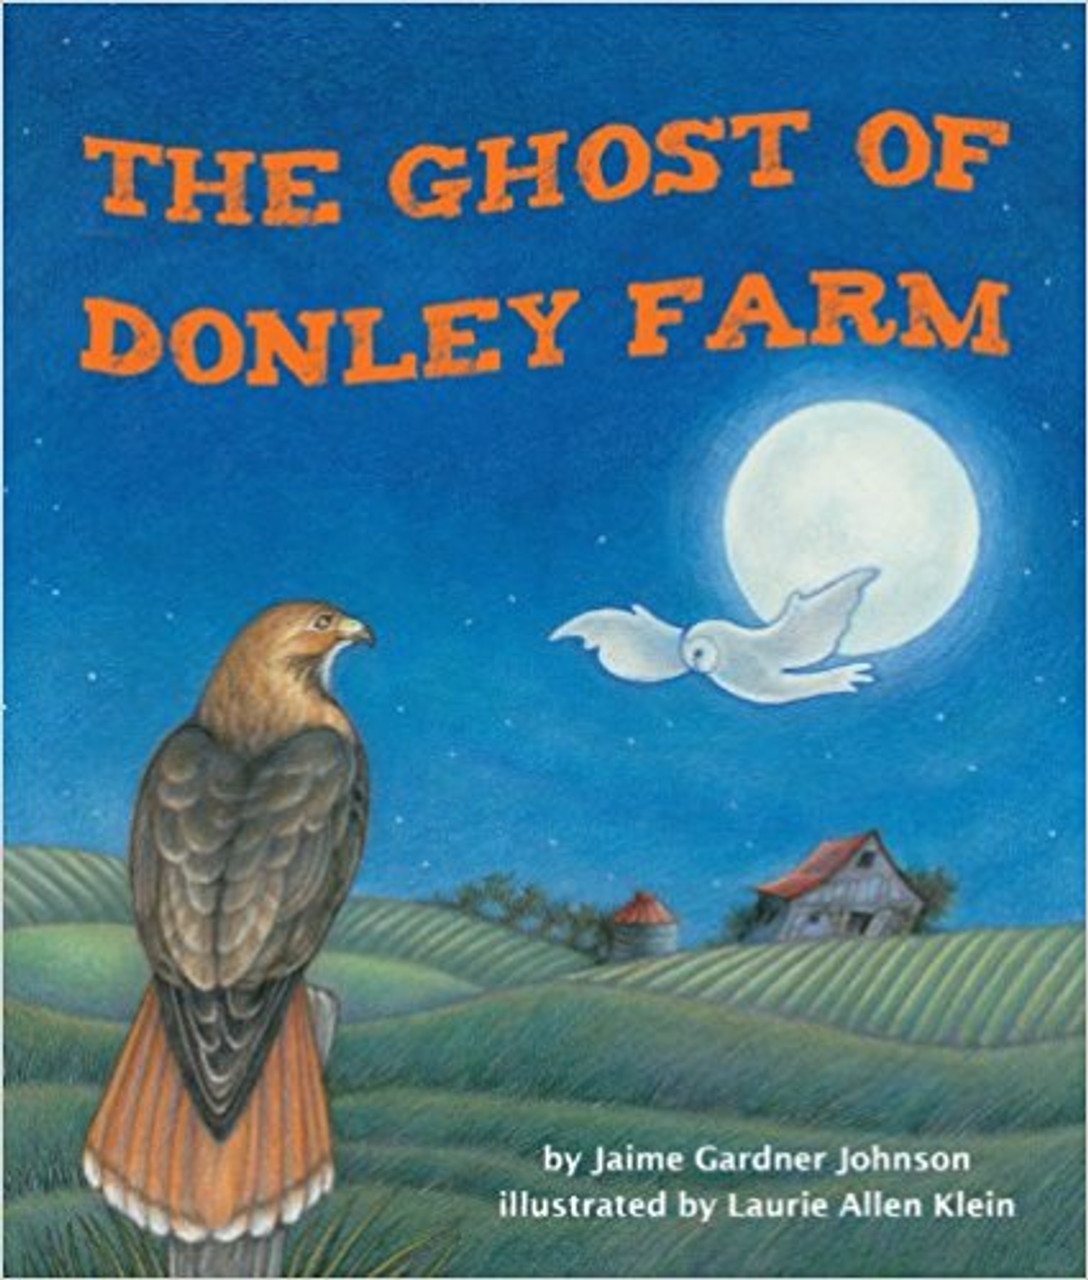 Rebecca the red-tailed hawk believes she knows every inch of the Donley Farm but has never met its famous ghost.  So she decides to stay up late one night to face the famous phantom and is soon engaged in conversation with Bernard the barn owl. Includes notes "For Creative Minds."